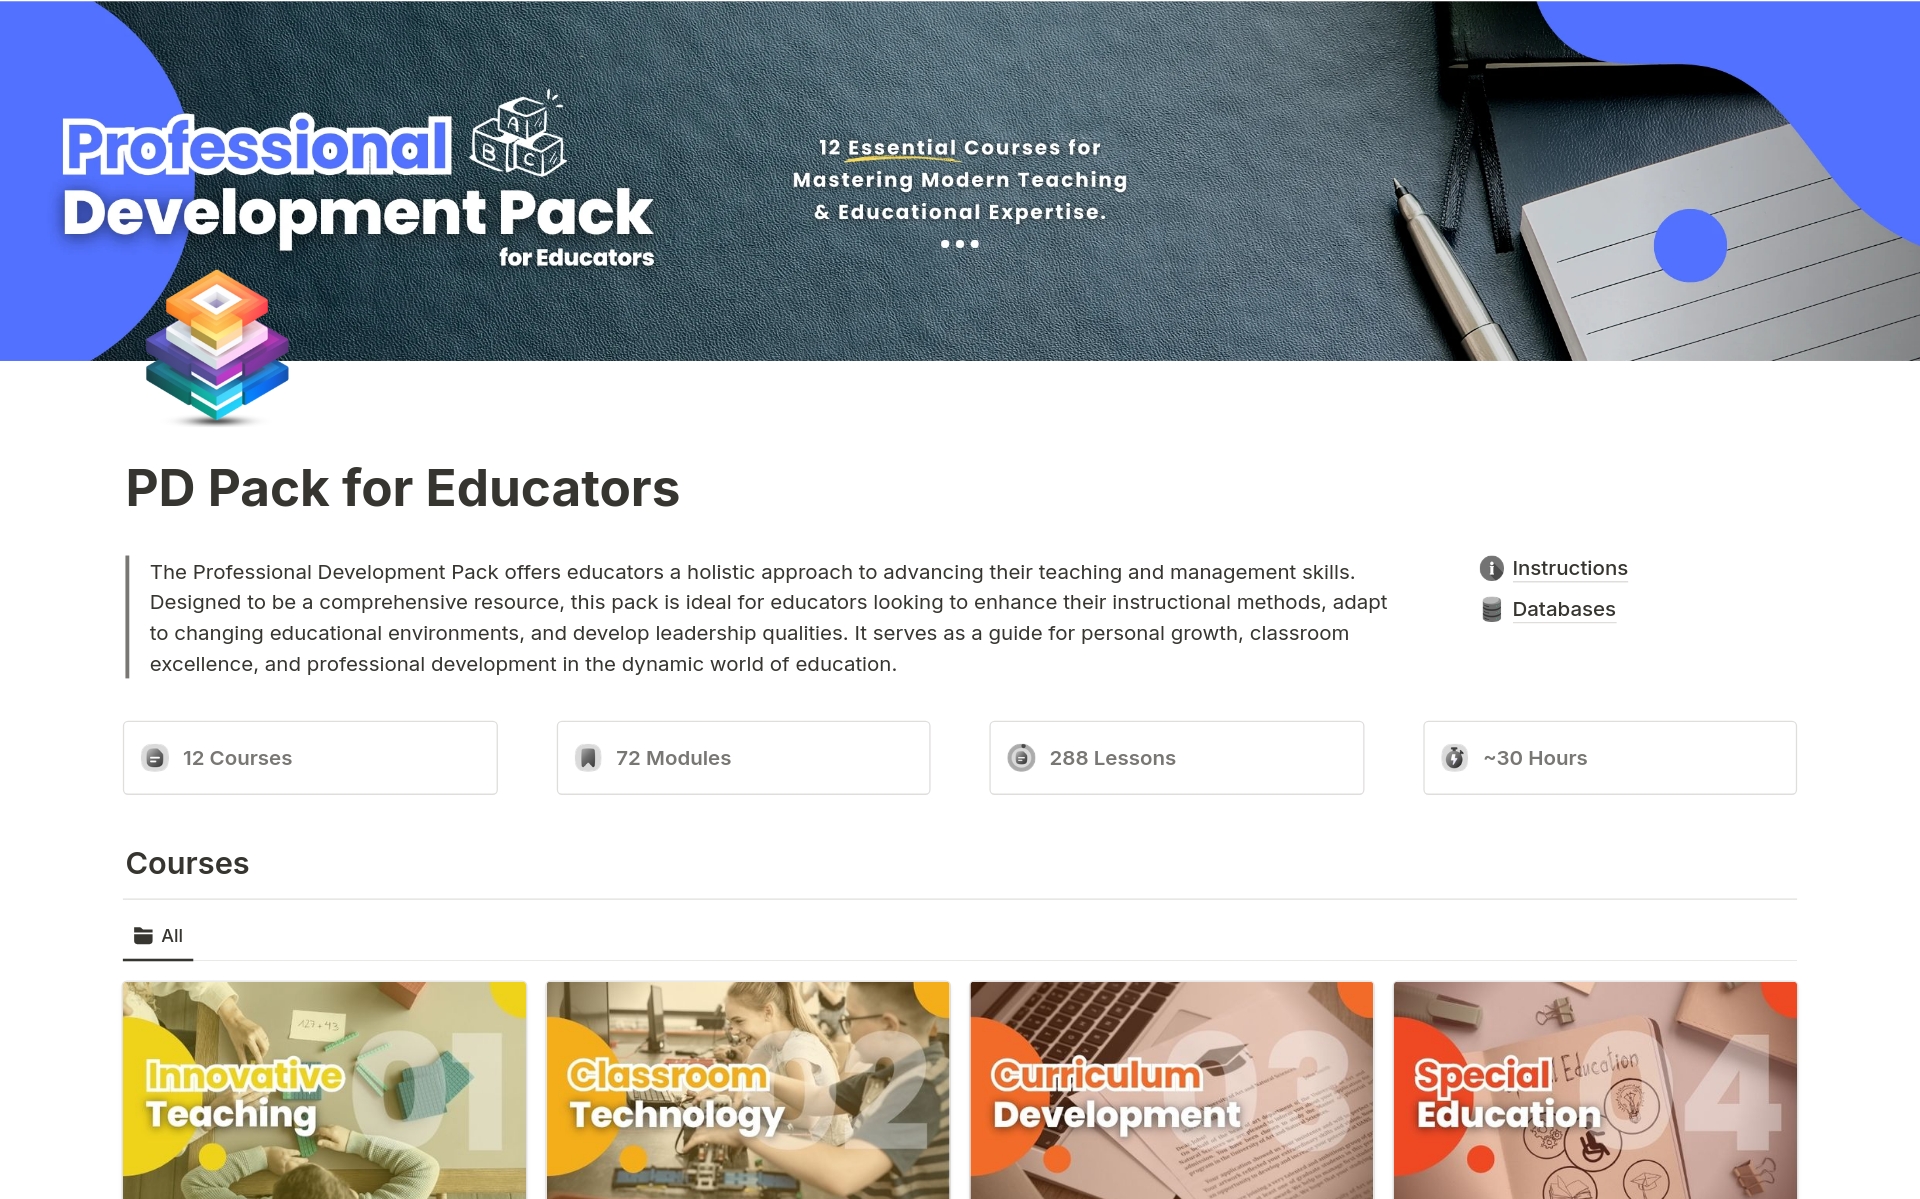 Designed to elevate the skills and knowledge of teachers in various essential areas of education. This pack encompasses 12 in-depth courses, each targeting specific facets of professional development in the education sector.